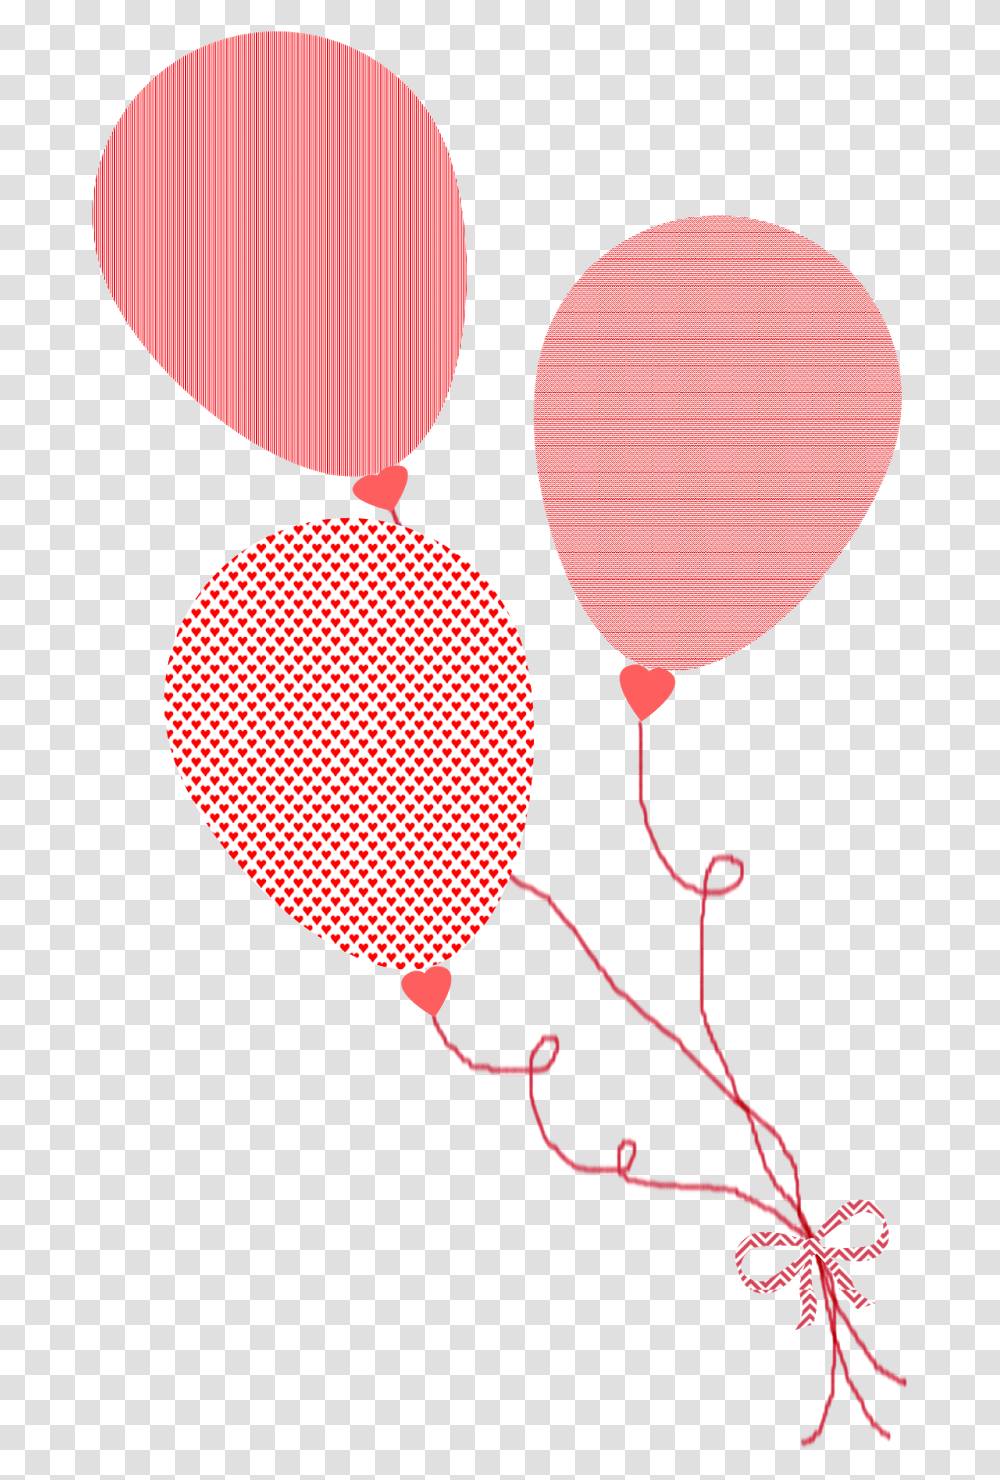 Download Balloons Cl Balloon Drawing Transparent Png